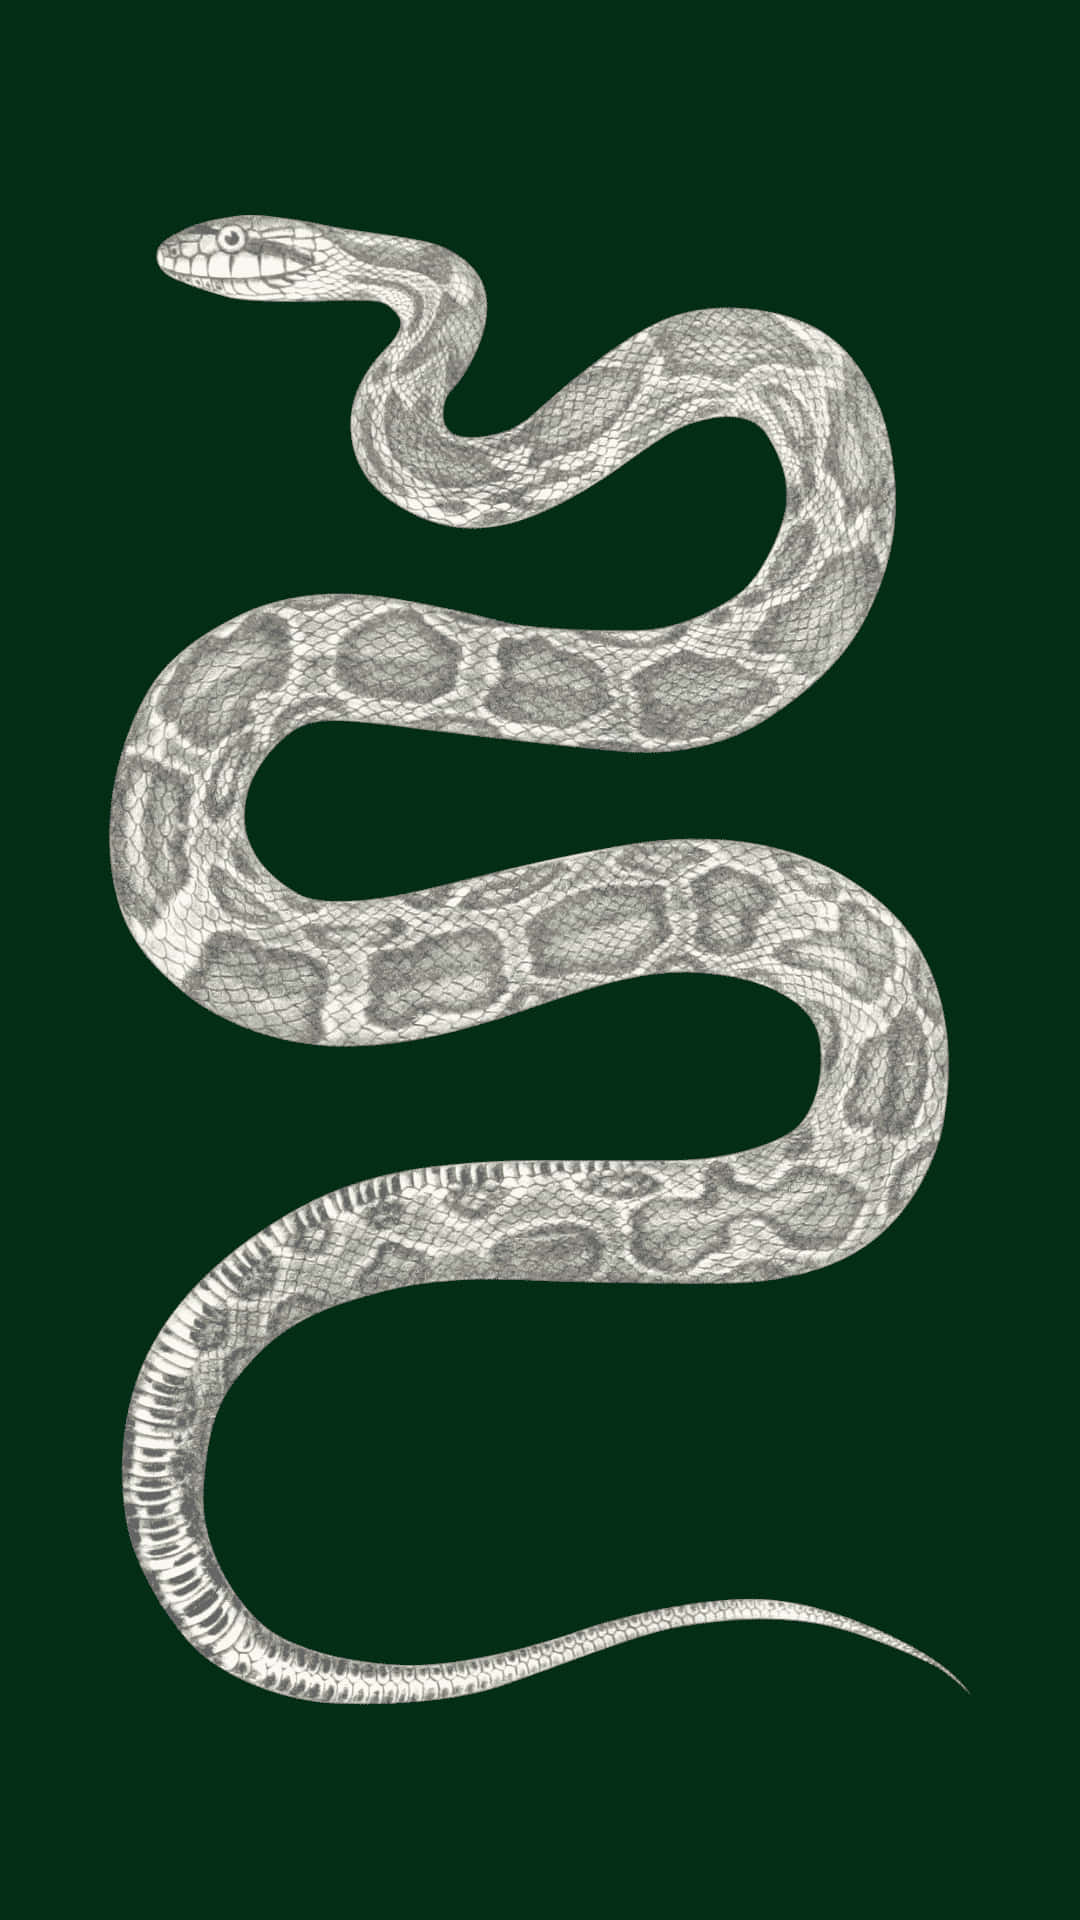 Enjoying a night of star gazing, this adorable Slytherin is sure to enchant. Wallpaper